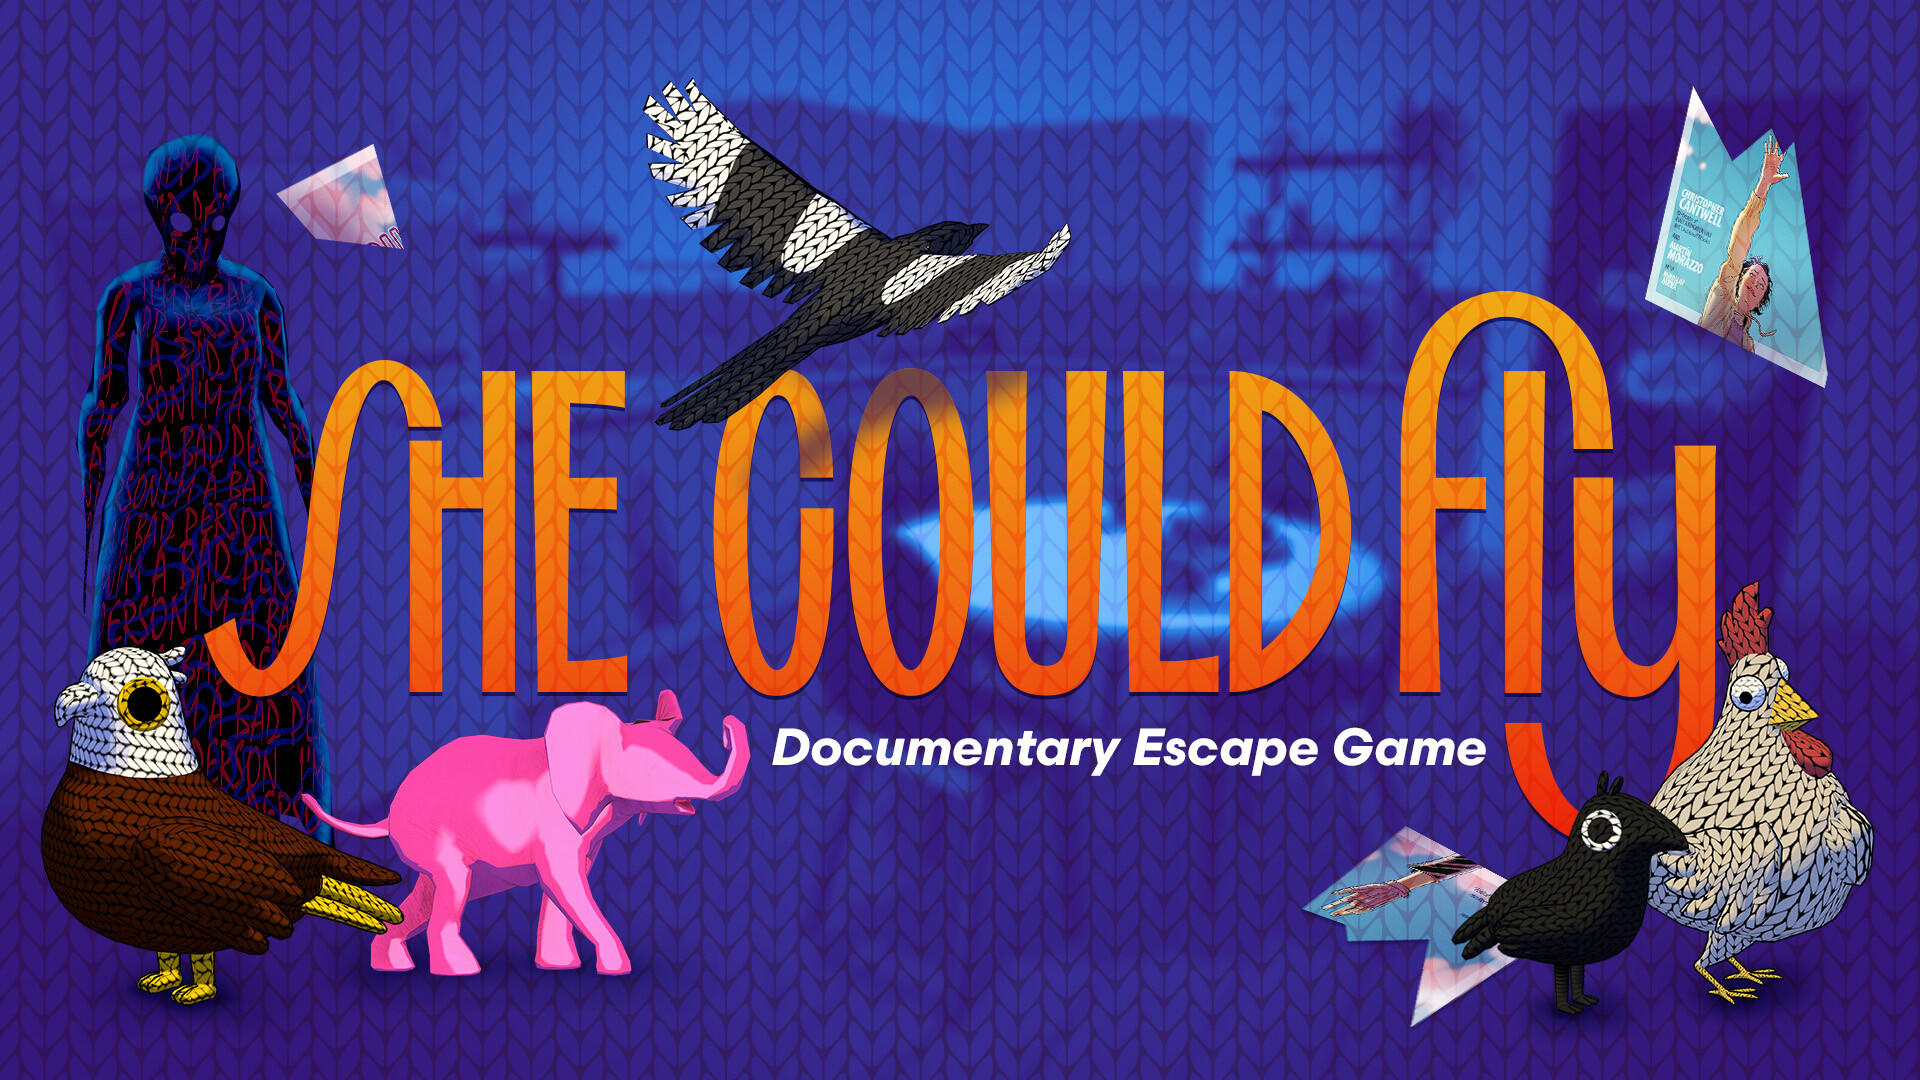 She Could Fly: Documentary Escape Game screenshot game